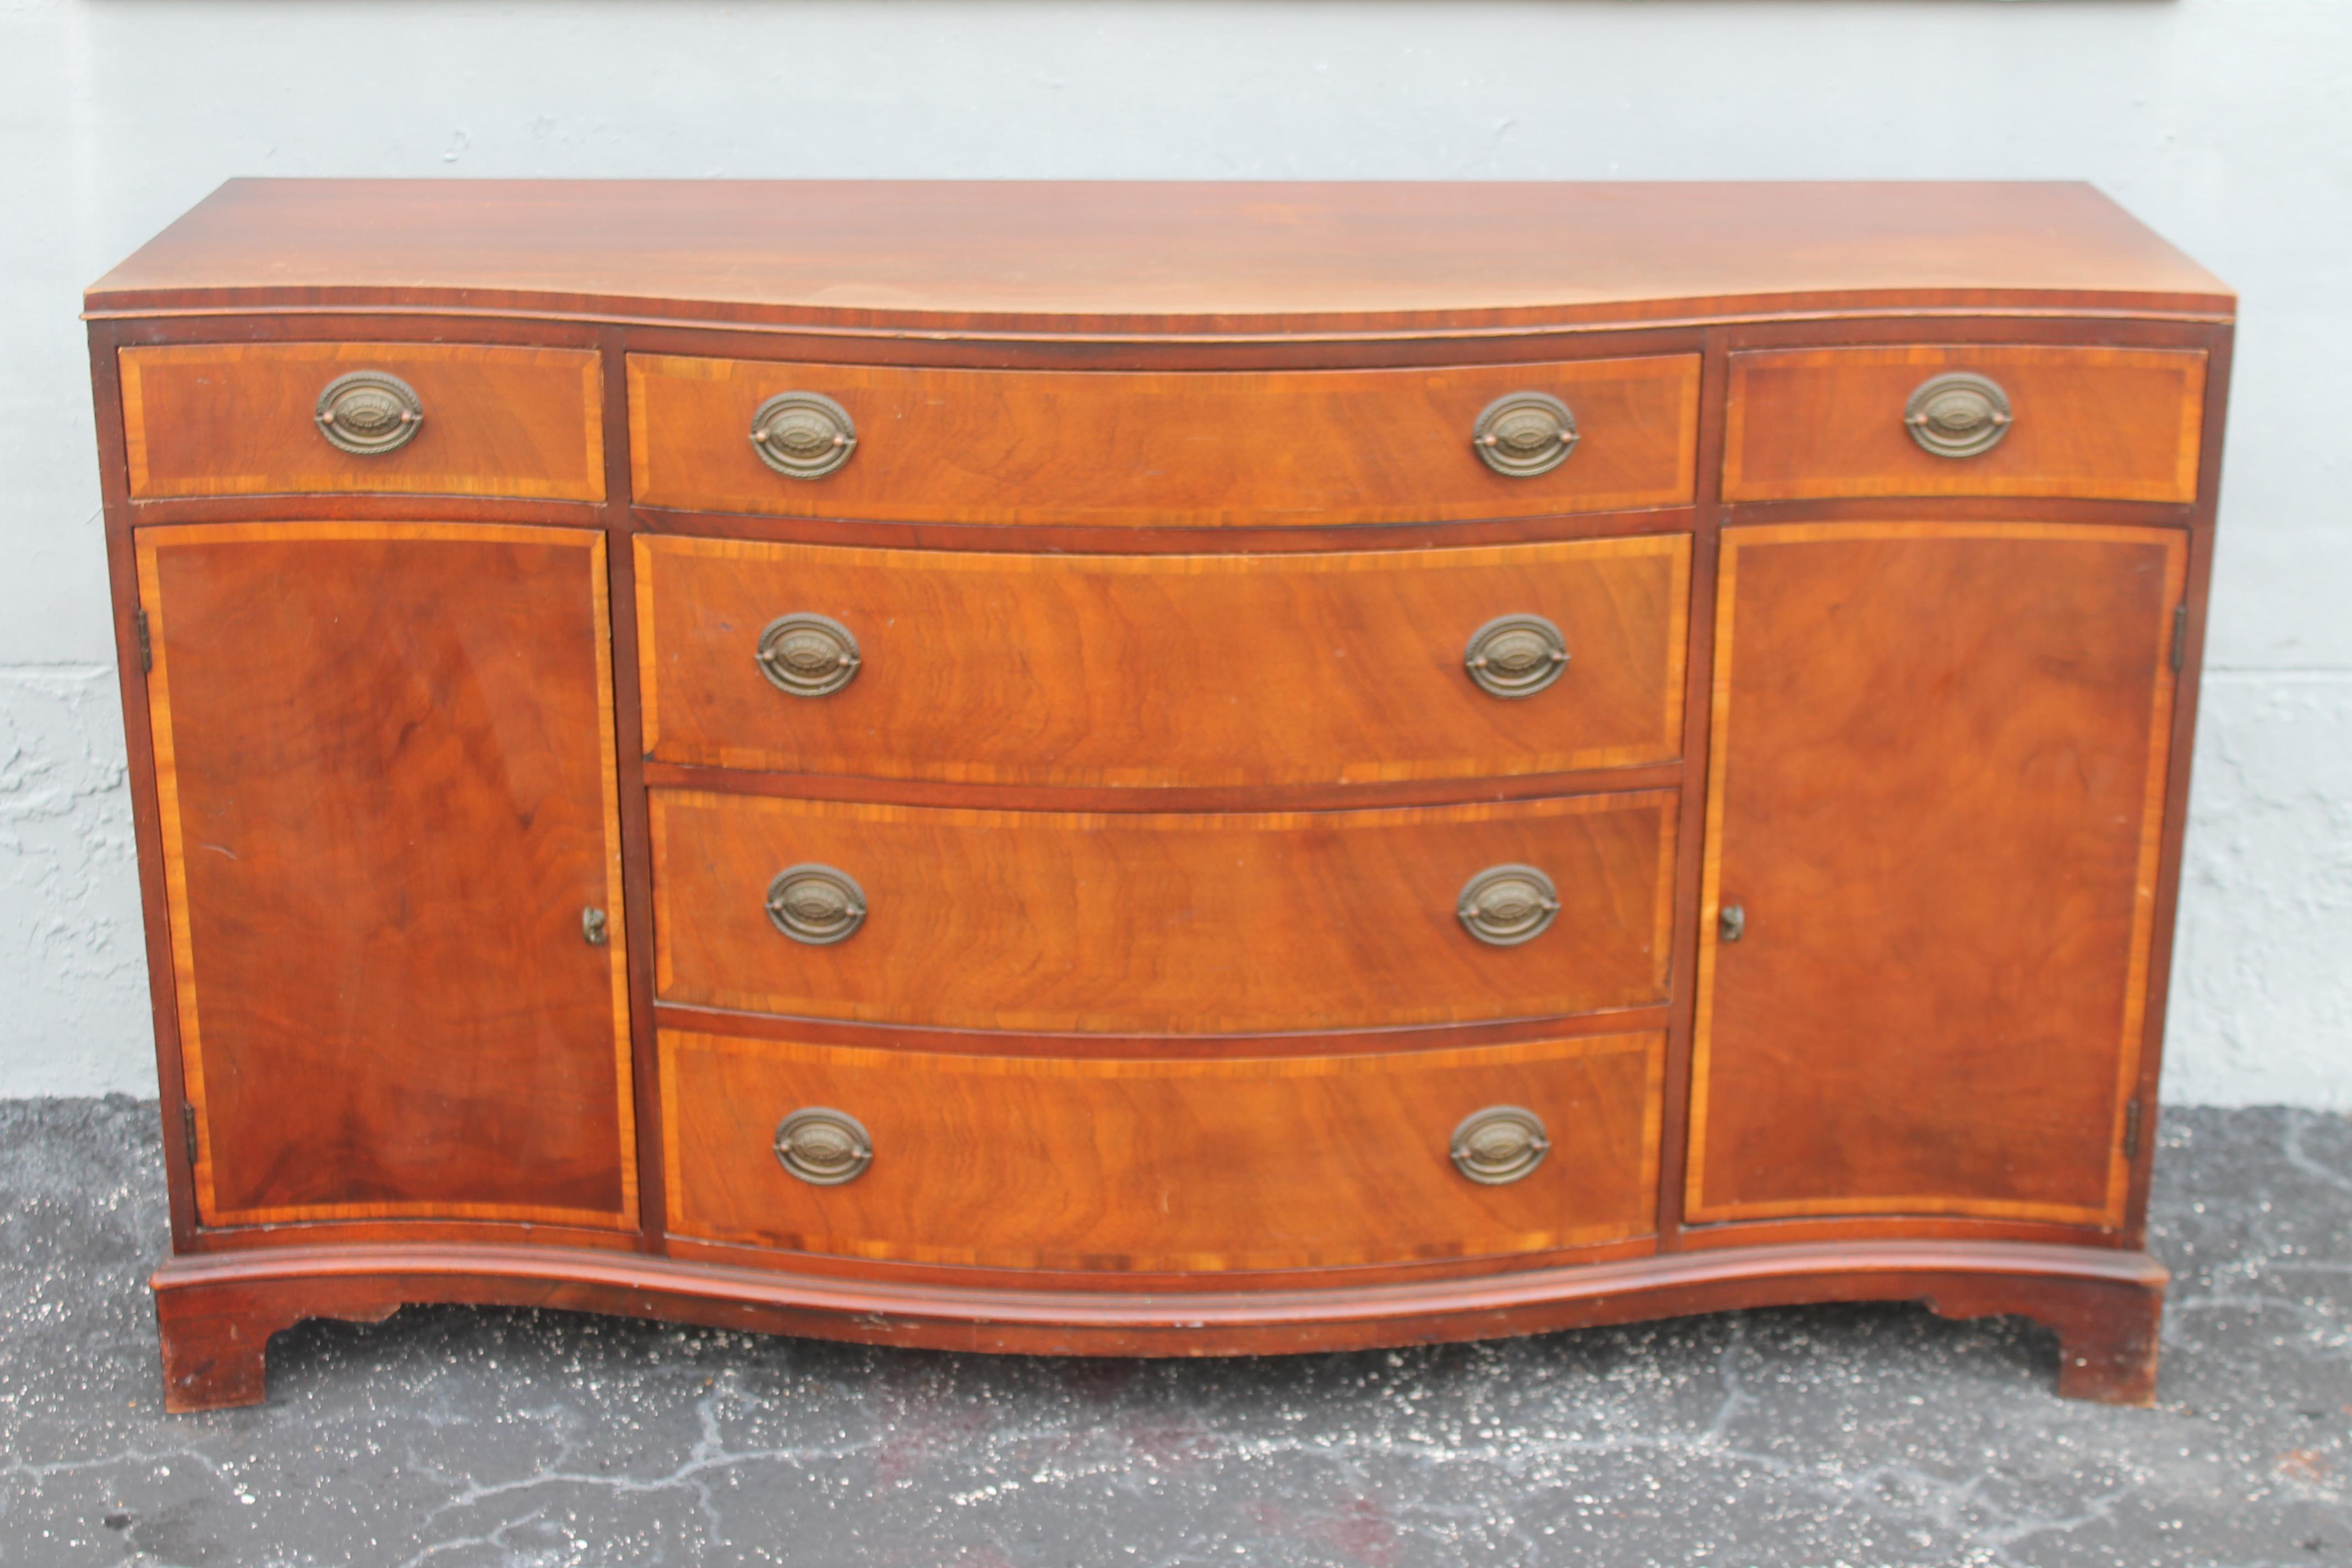 1940's Traditional style Mahogany Buffet/ Credenza/ Sideboard/ Dry Bar. Beautifully detailed mahogany. Great storage space. Center bank of drawers.